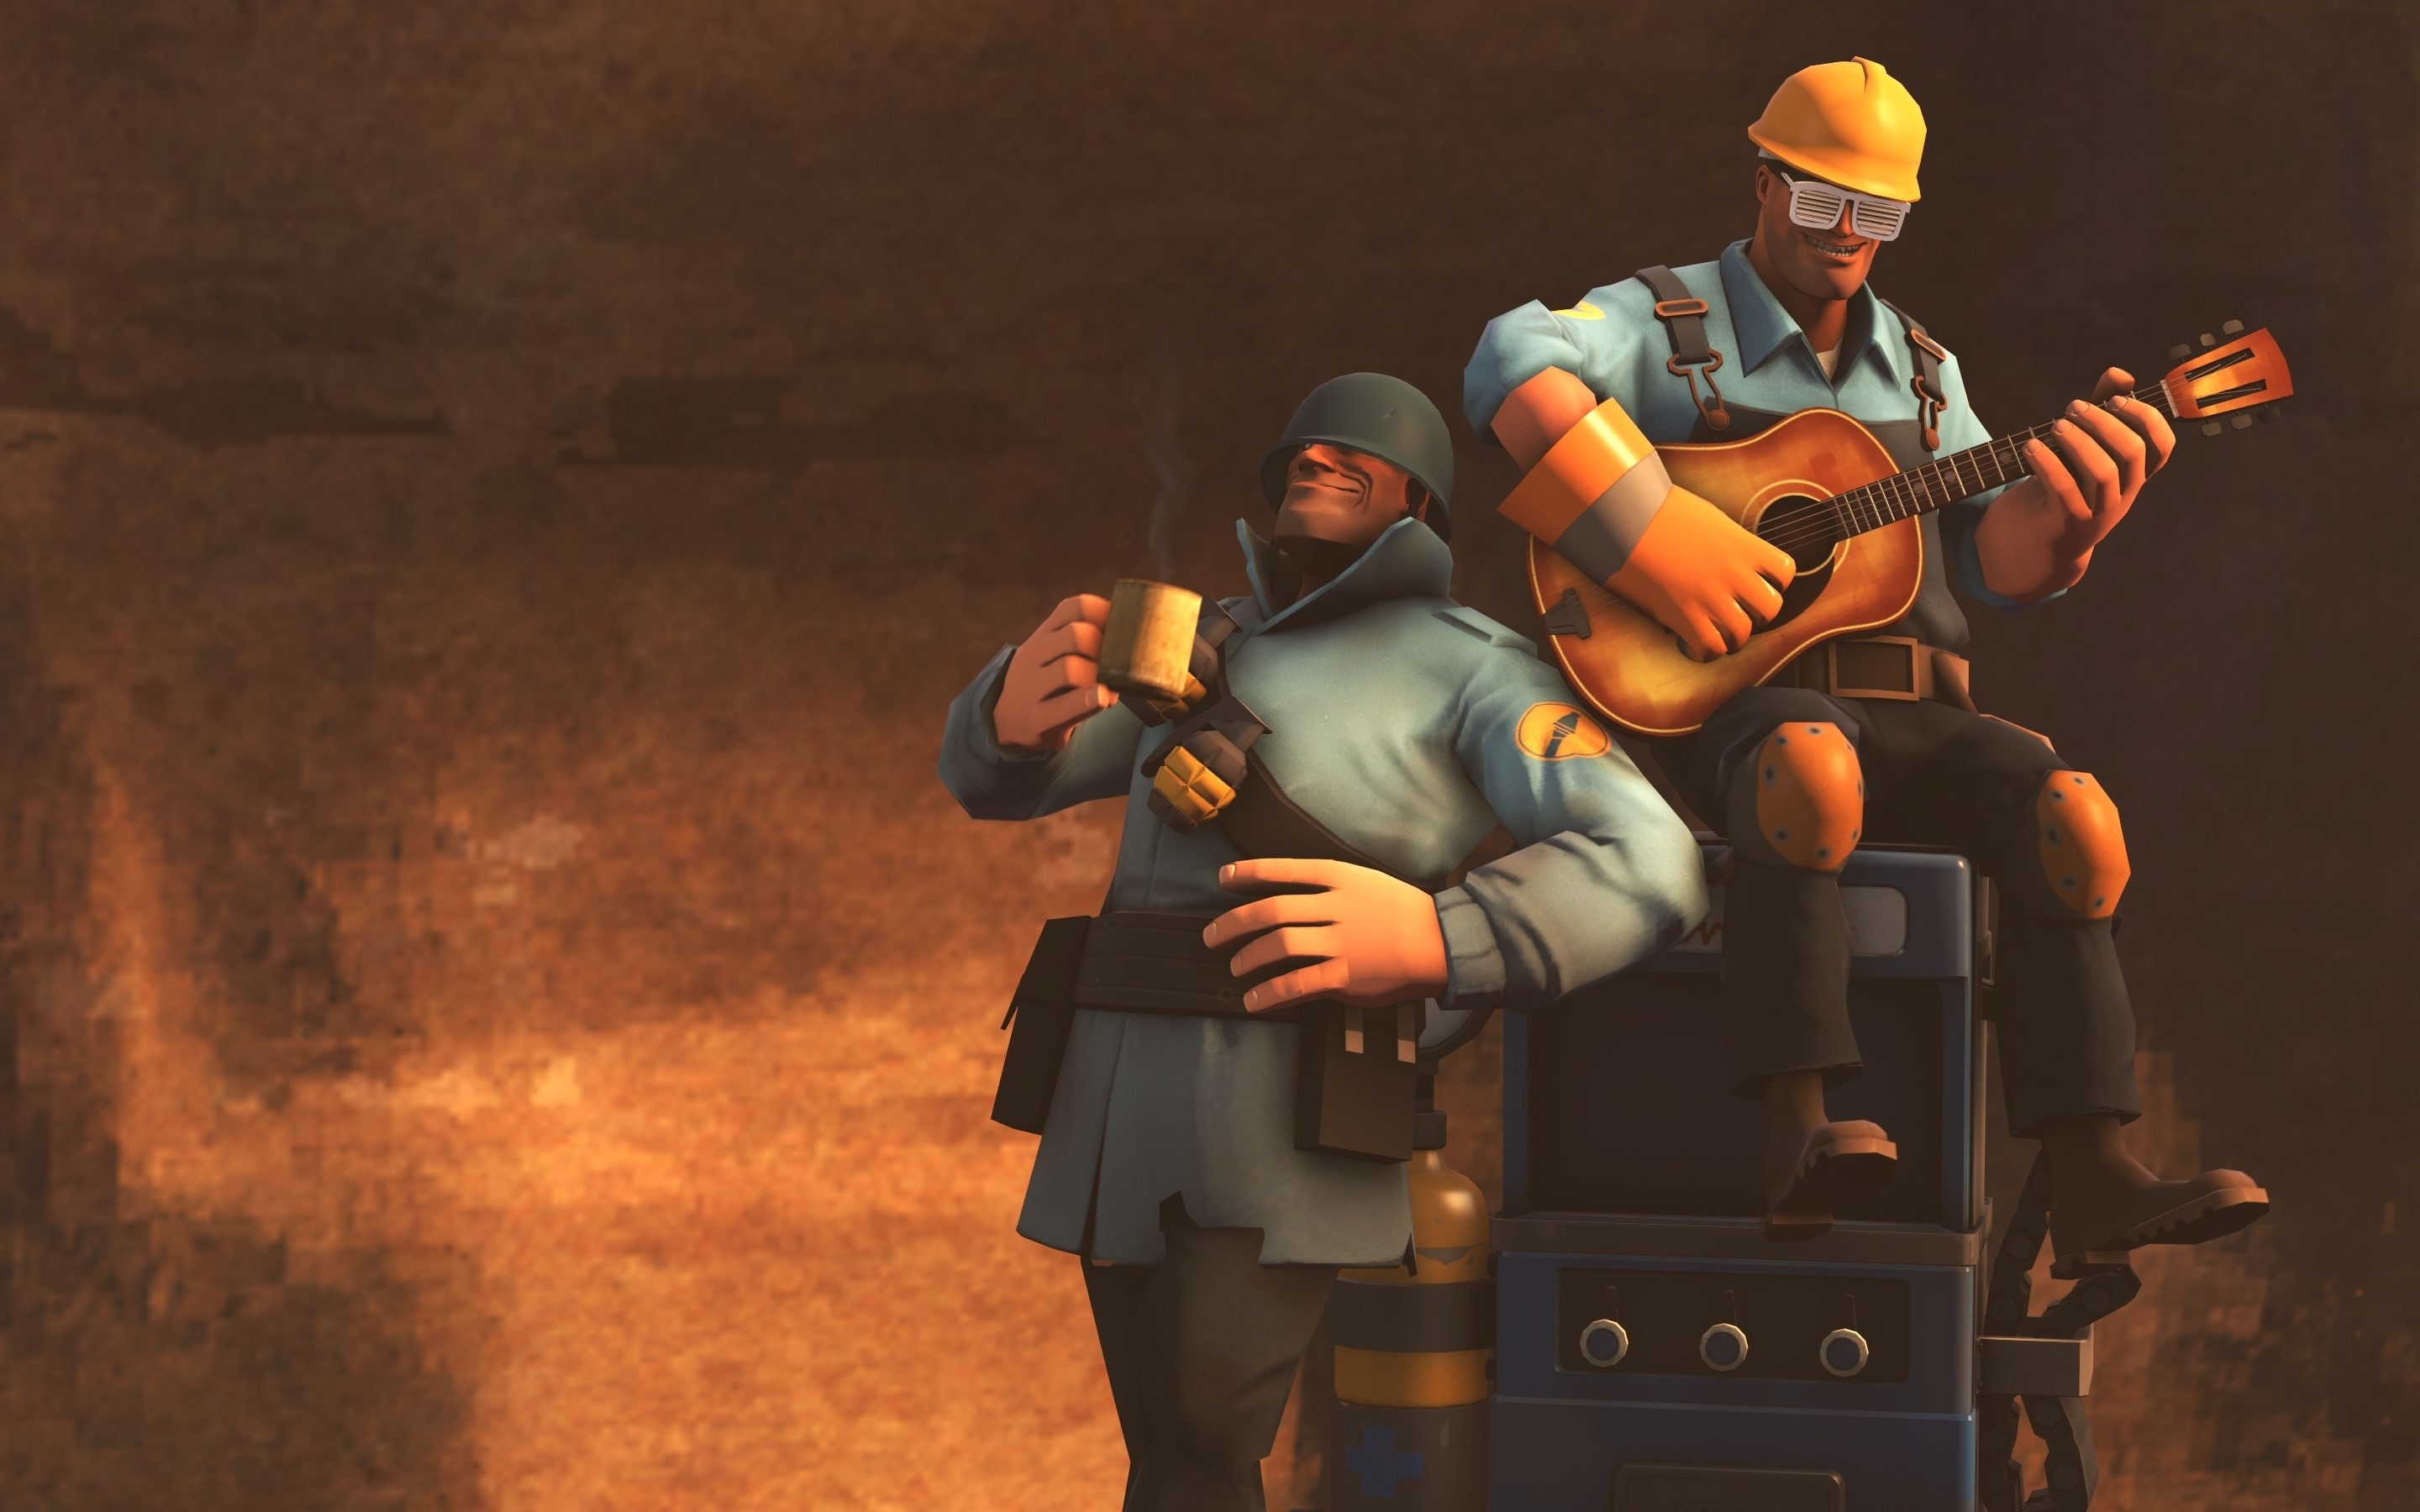 2880x1800 Title : team fortress 2 wallpaper soldier and engie chill wallpapers.  Dimension : 2880 x 1800. File Type : JPG/JPEG